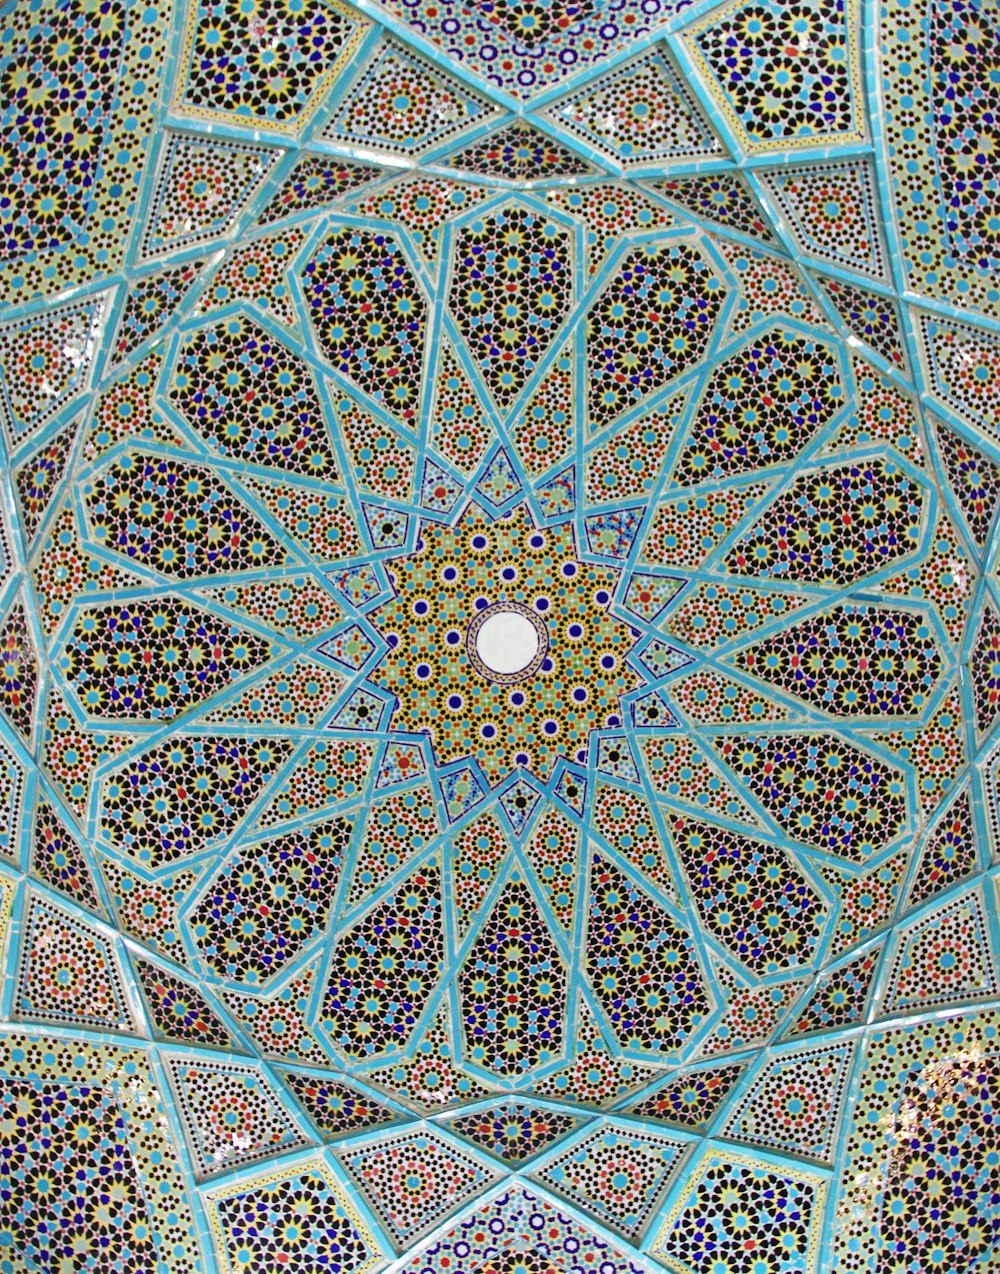 1500+ Islamic Art Pictures | Download Free Images on Unsplash